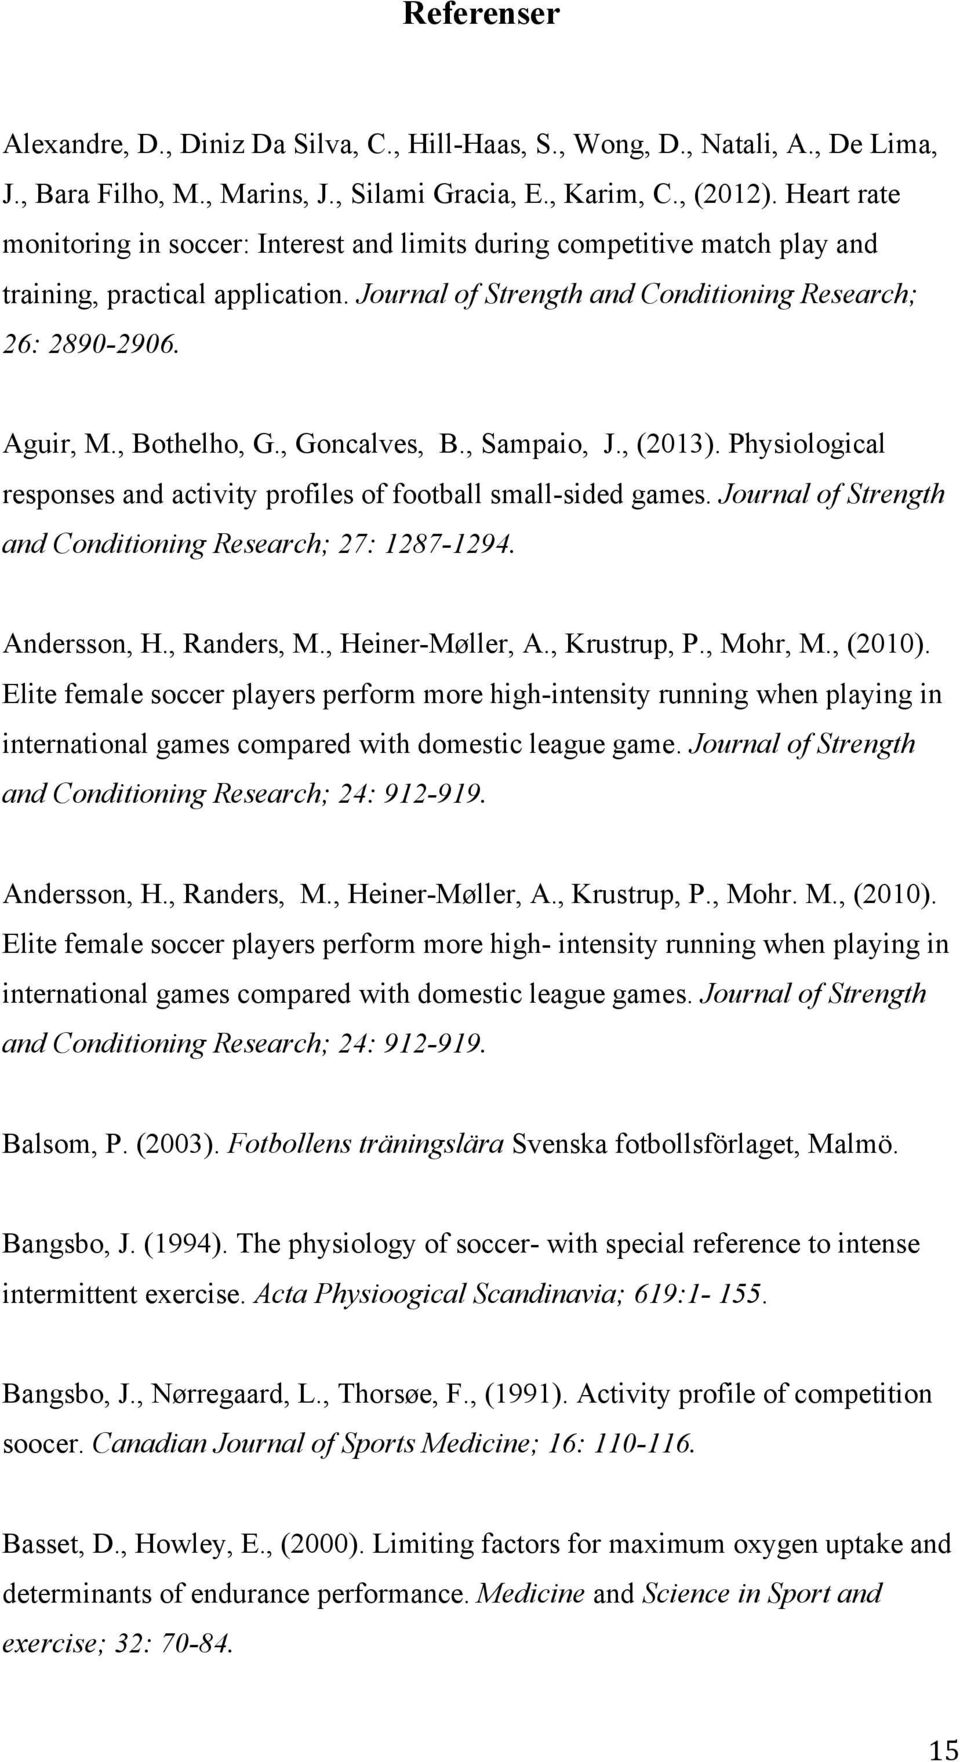 , Bothelho, G., Goncalves, B., Sampaio, J., (2013). Physiological responses and activity profiles of football small-sided games. Journal of Strength and Conditioning Research; 27: 1287-1294.